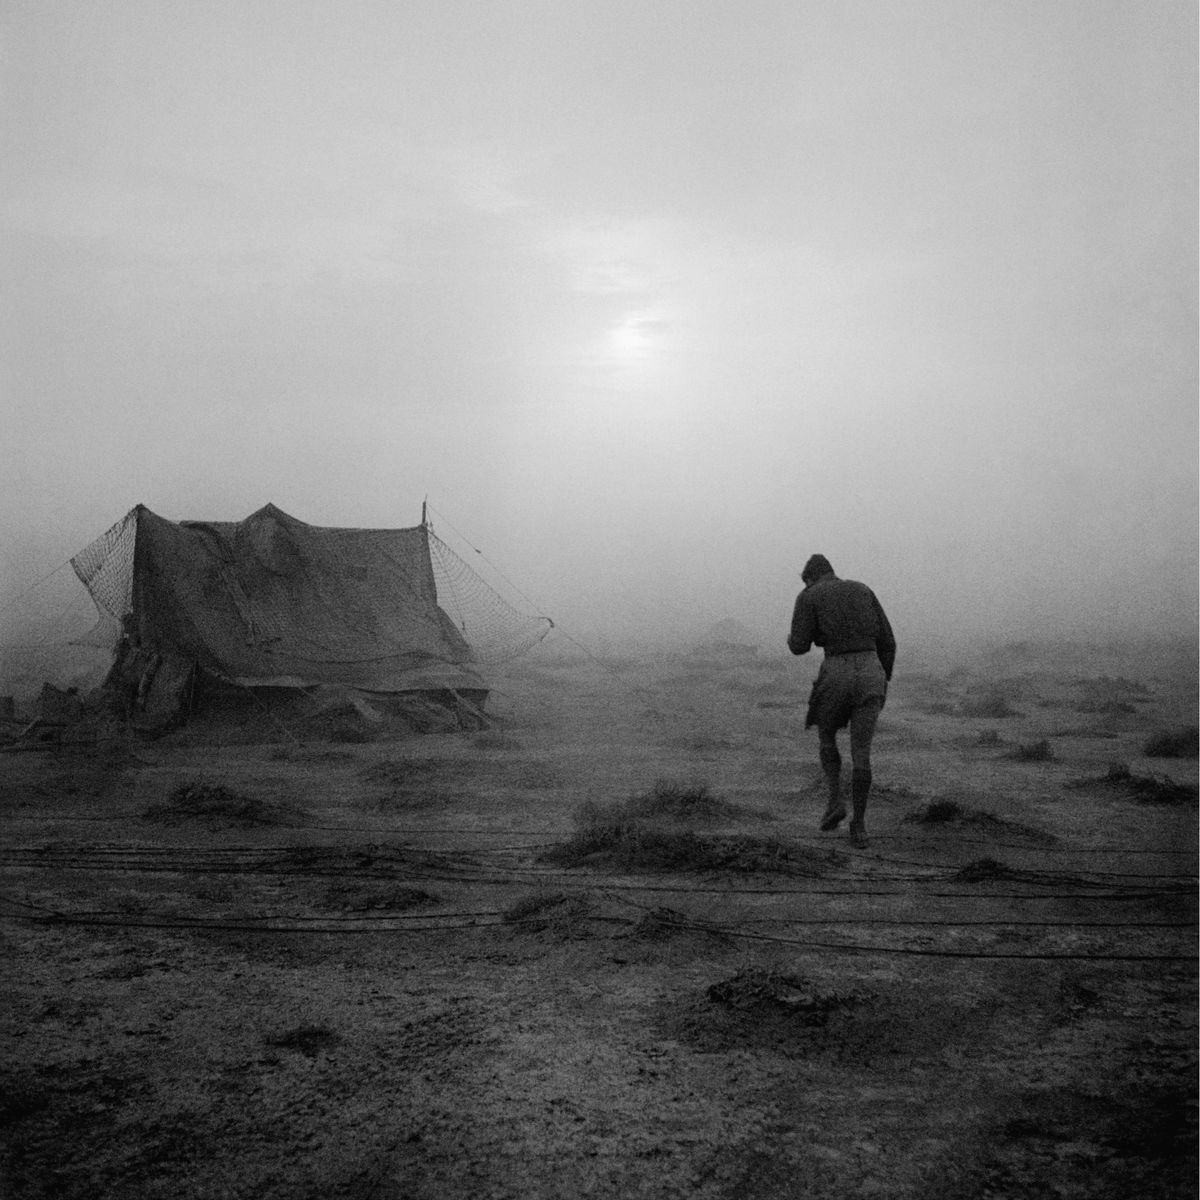 Cecil Beaton's image of a soldier battling his way through a sandstorm in the Western Desert during 1942. Imperial War Museum.